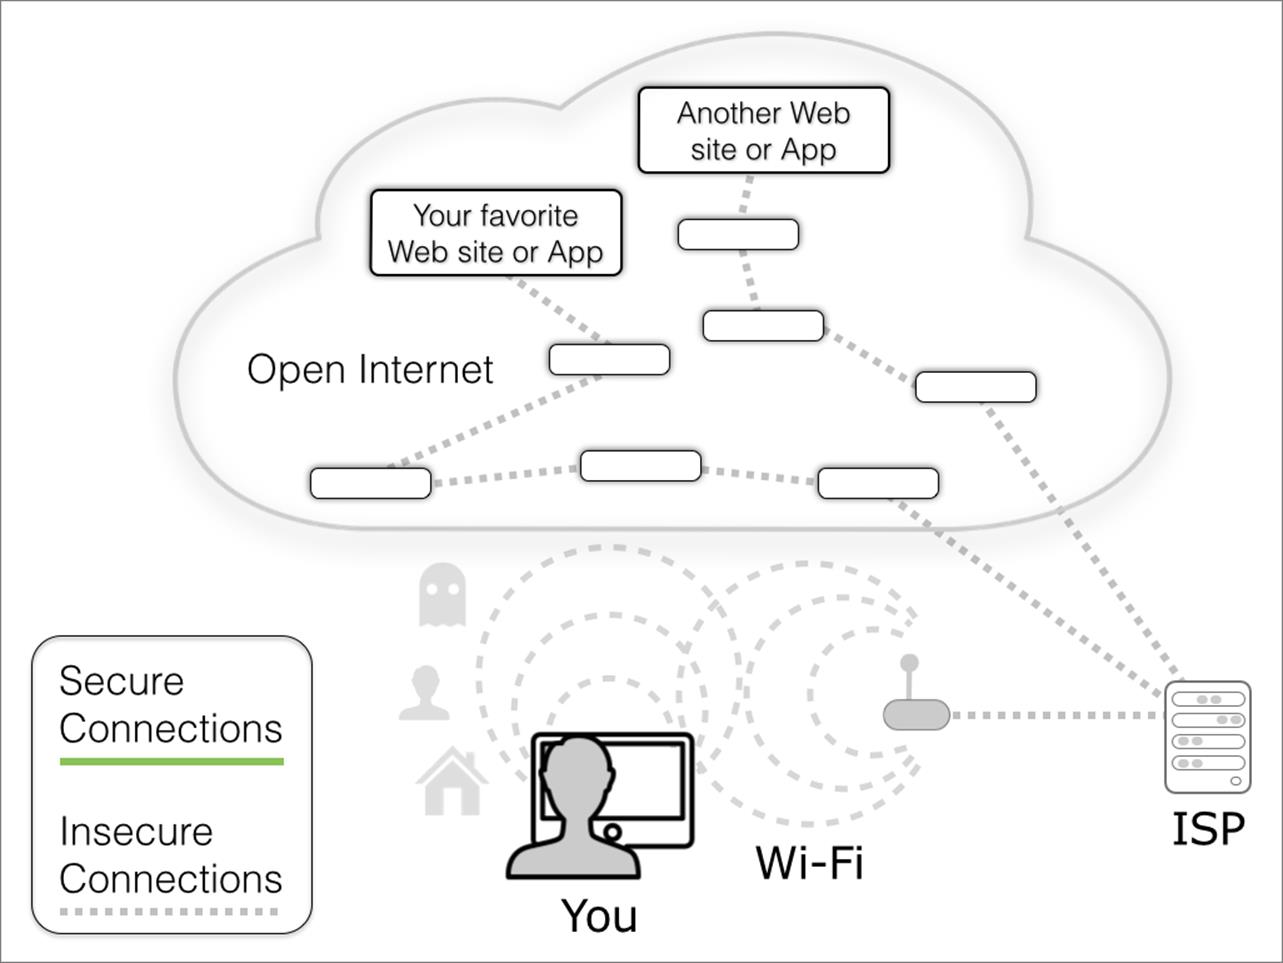 **Figure 1:** Without encryption, your Wi-Fi connection—the most local and most vulnerable portion of the path to other computers on the Internet—could easily be “sniffed” by someone nearby.